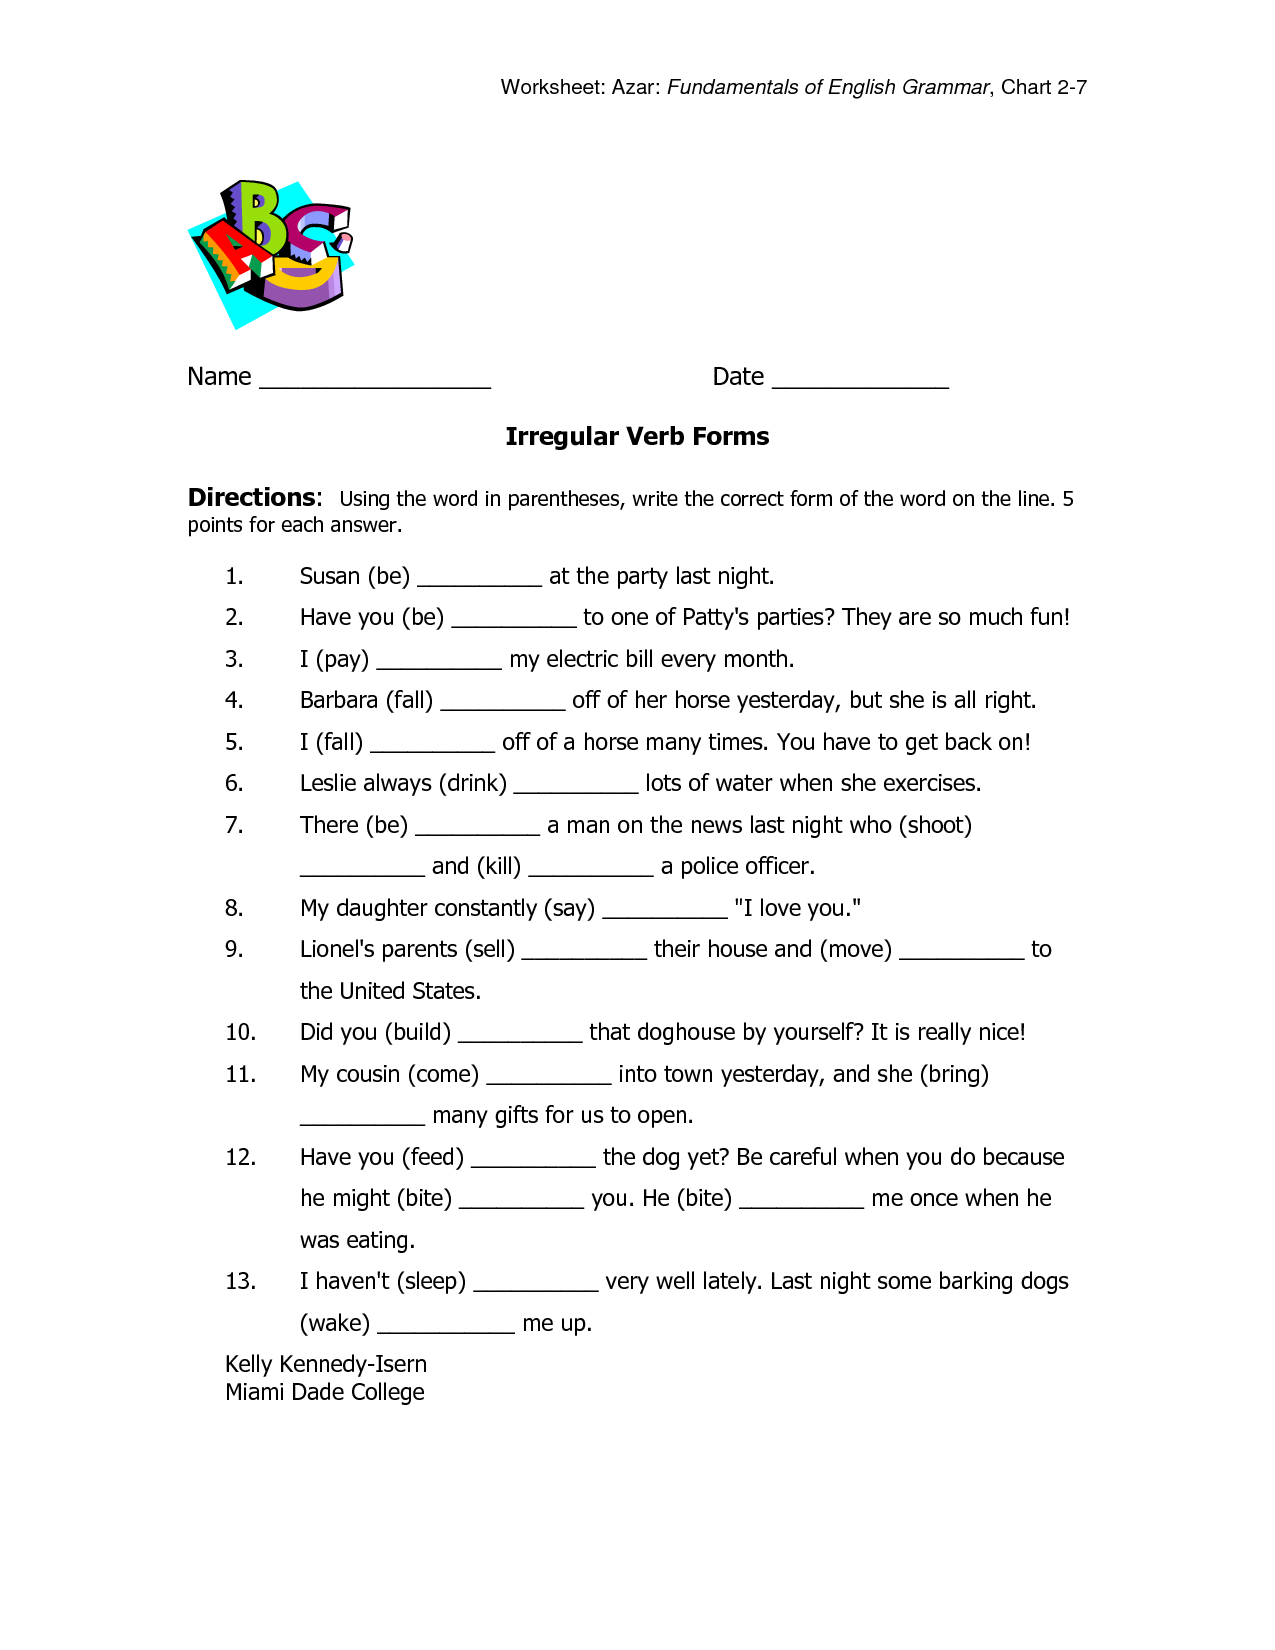 complete-the-sentence-by-changing-the-verbs-to-present-tense-form-worksheet-turtle-diary